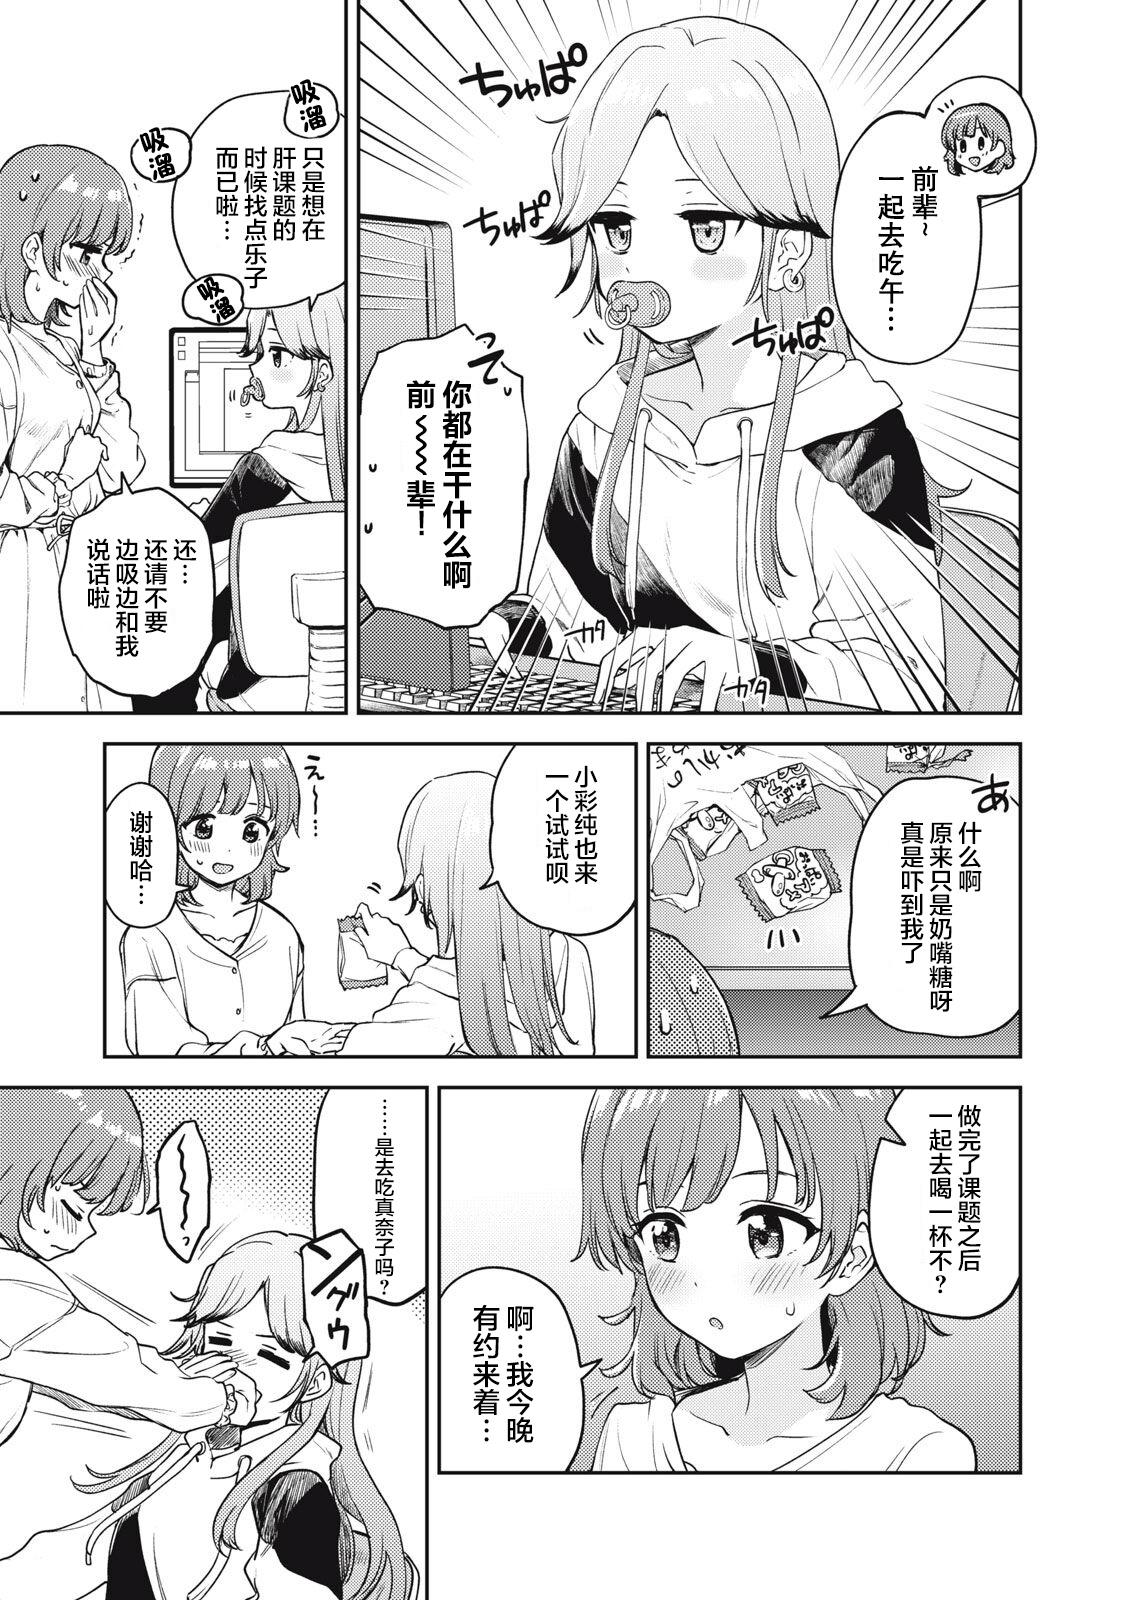 Cavala Asumi-chan Is Interested In Lesbian Brothels! Extra Episode Moan - Page 1